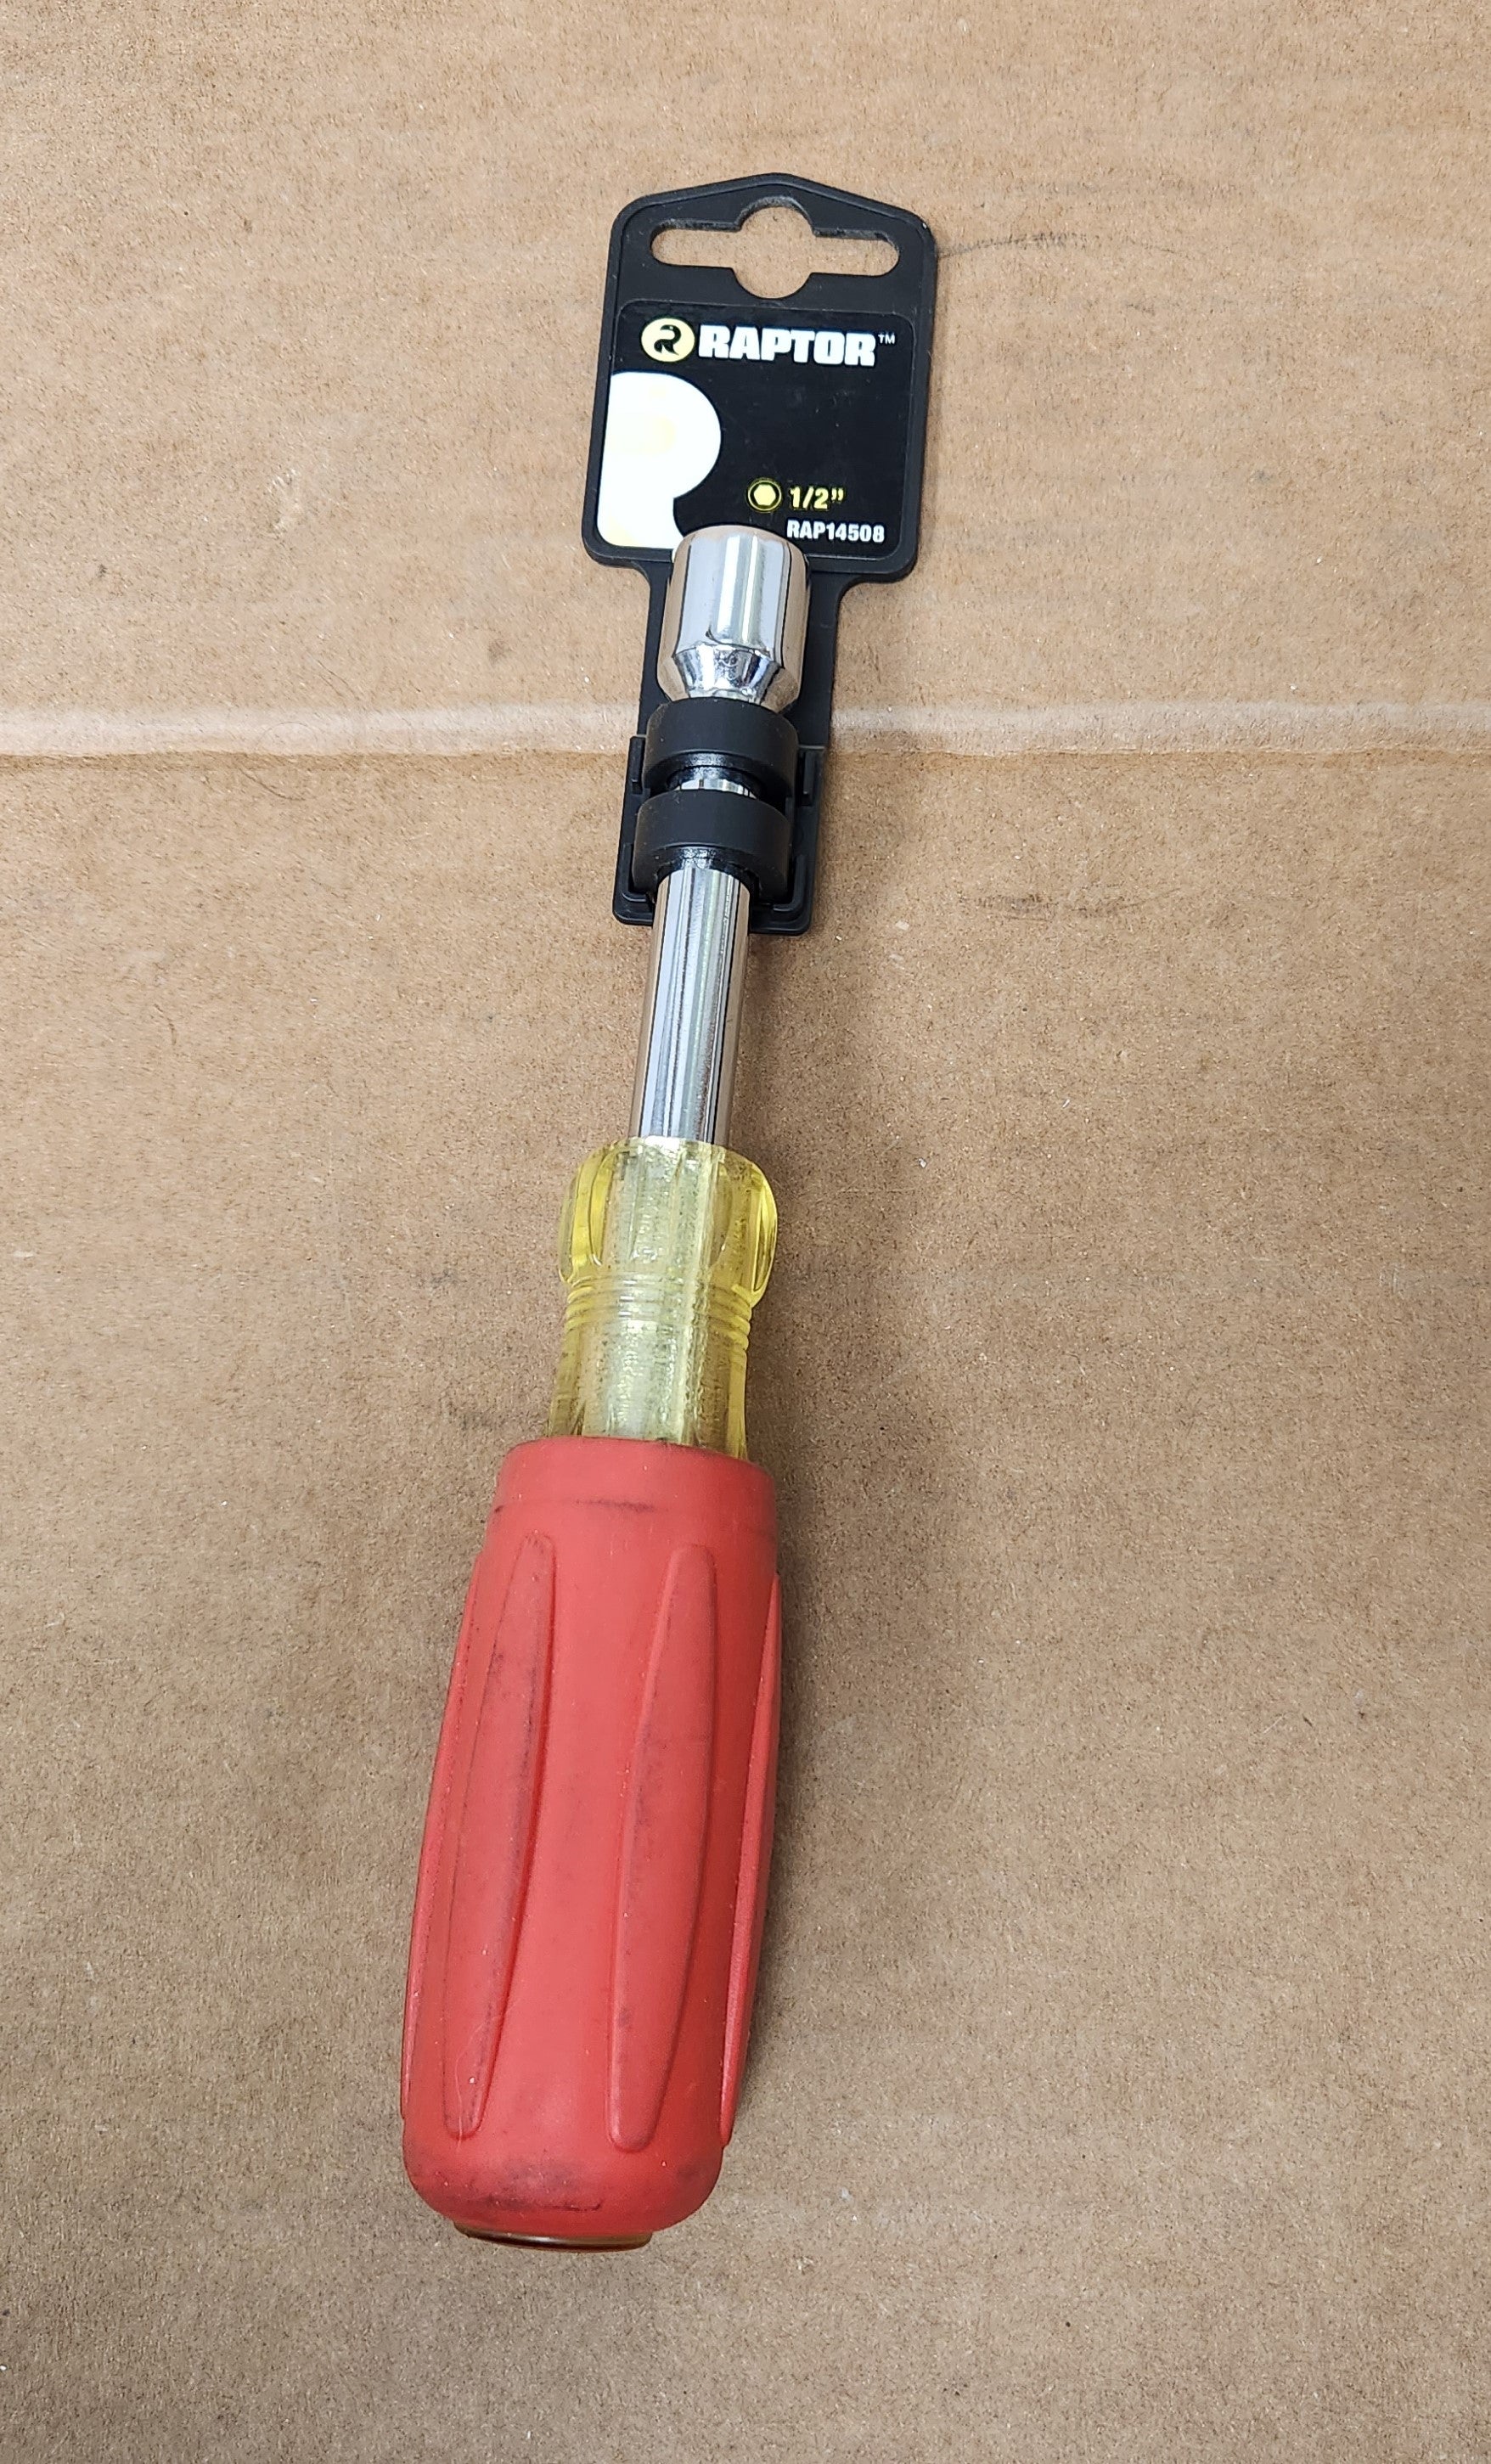 1/2" NUT DRIVER